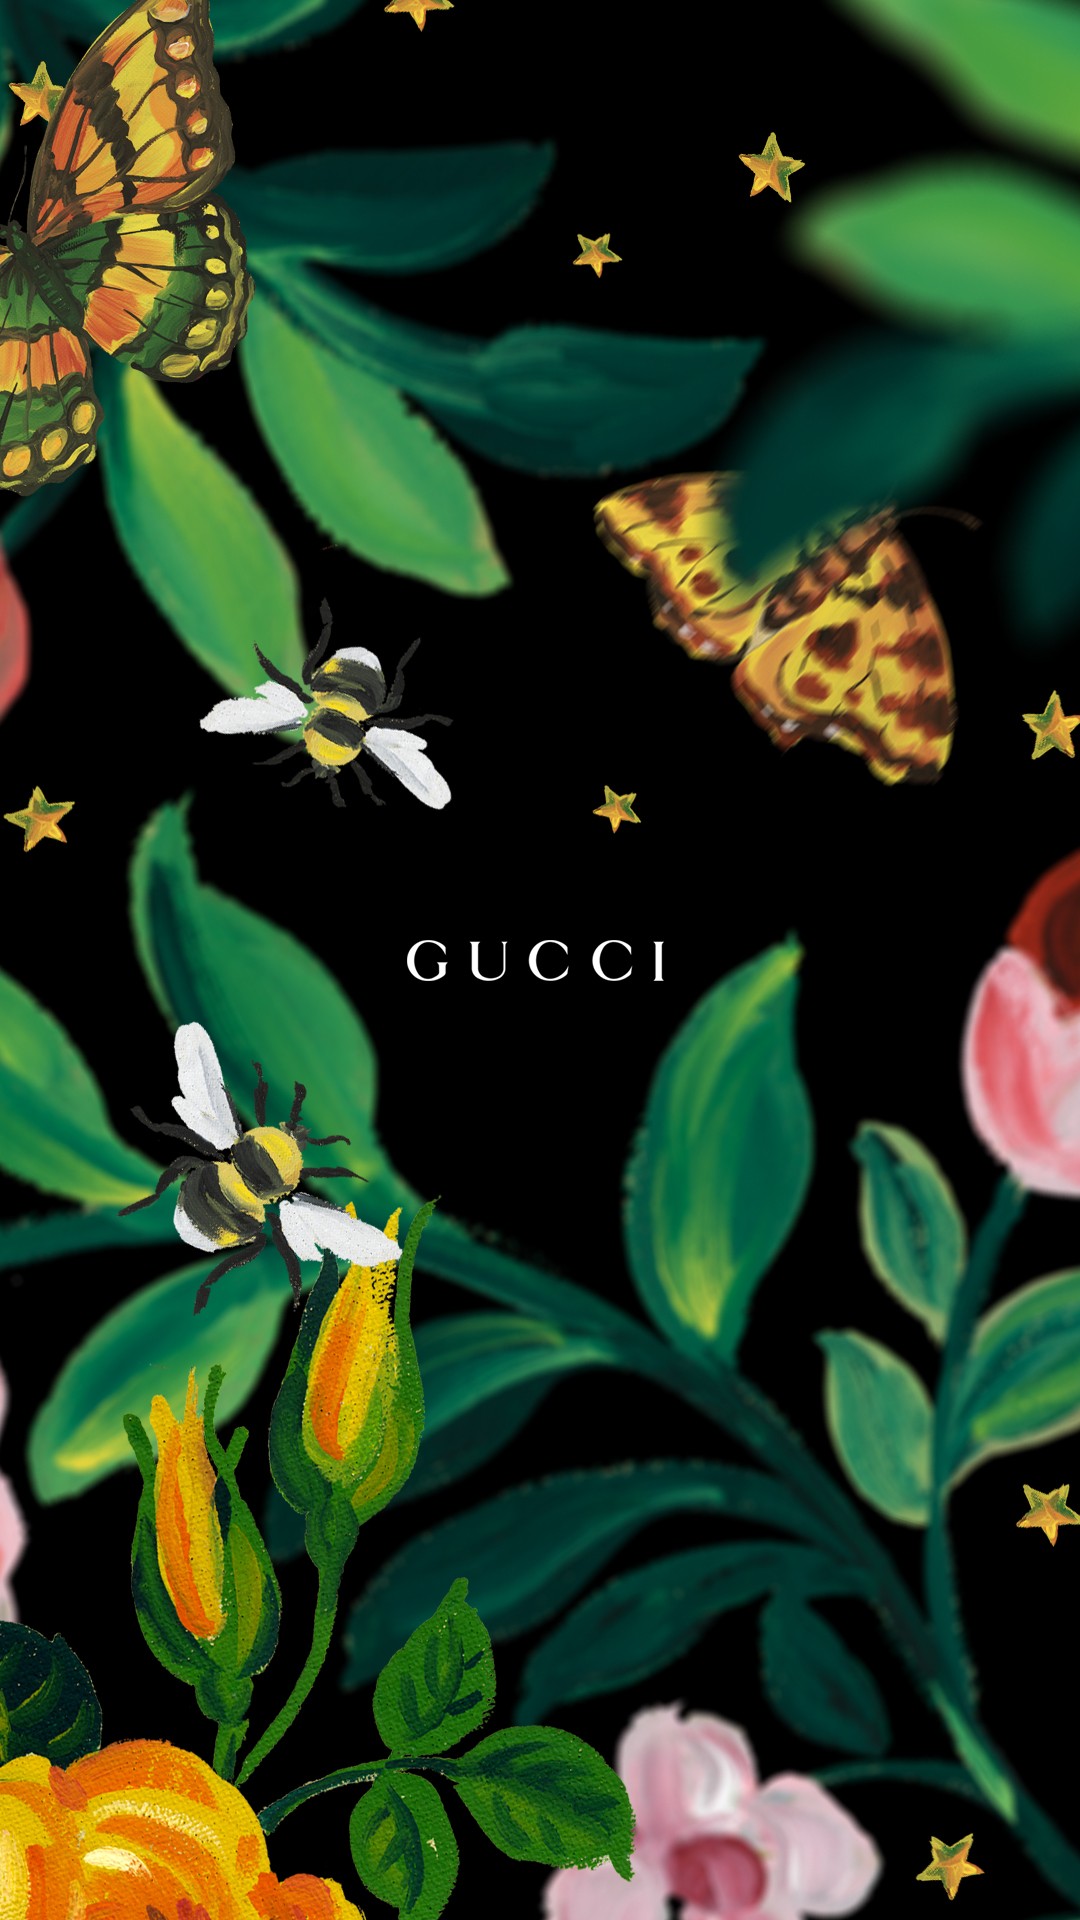 Gucci Wallpapers for iPhone Mobile | PixelsTalk.Net